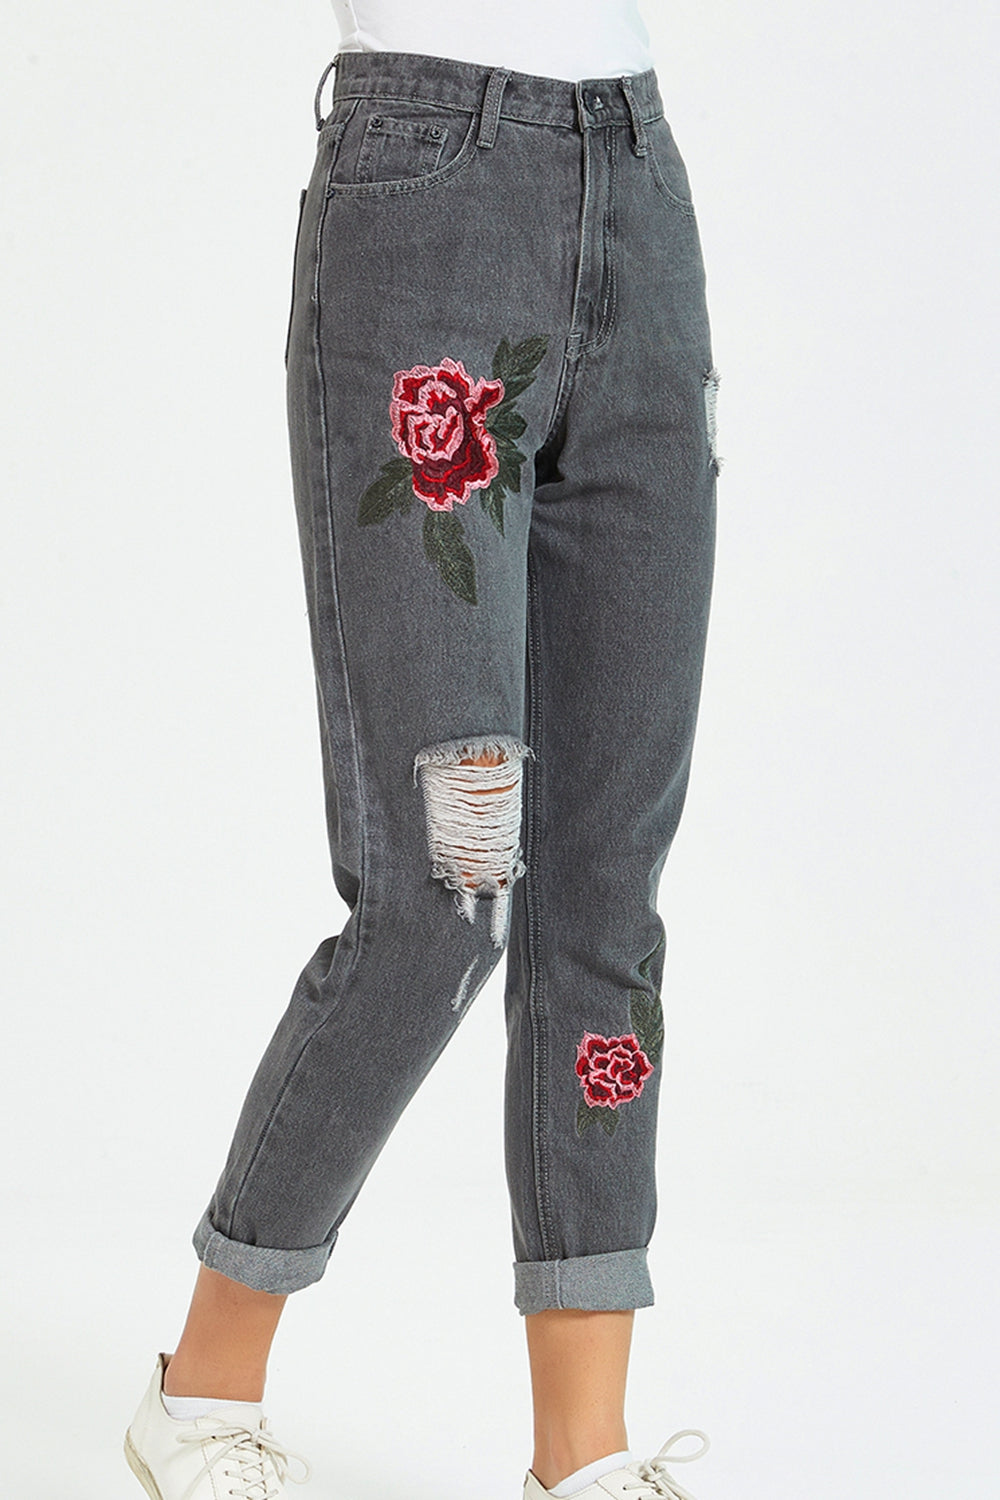 Dim Gray Flower Embroidery Distressed Jeans Sentient Beauty Fashions Apparel & Accessories